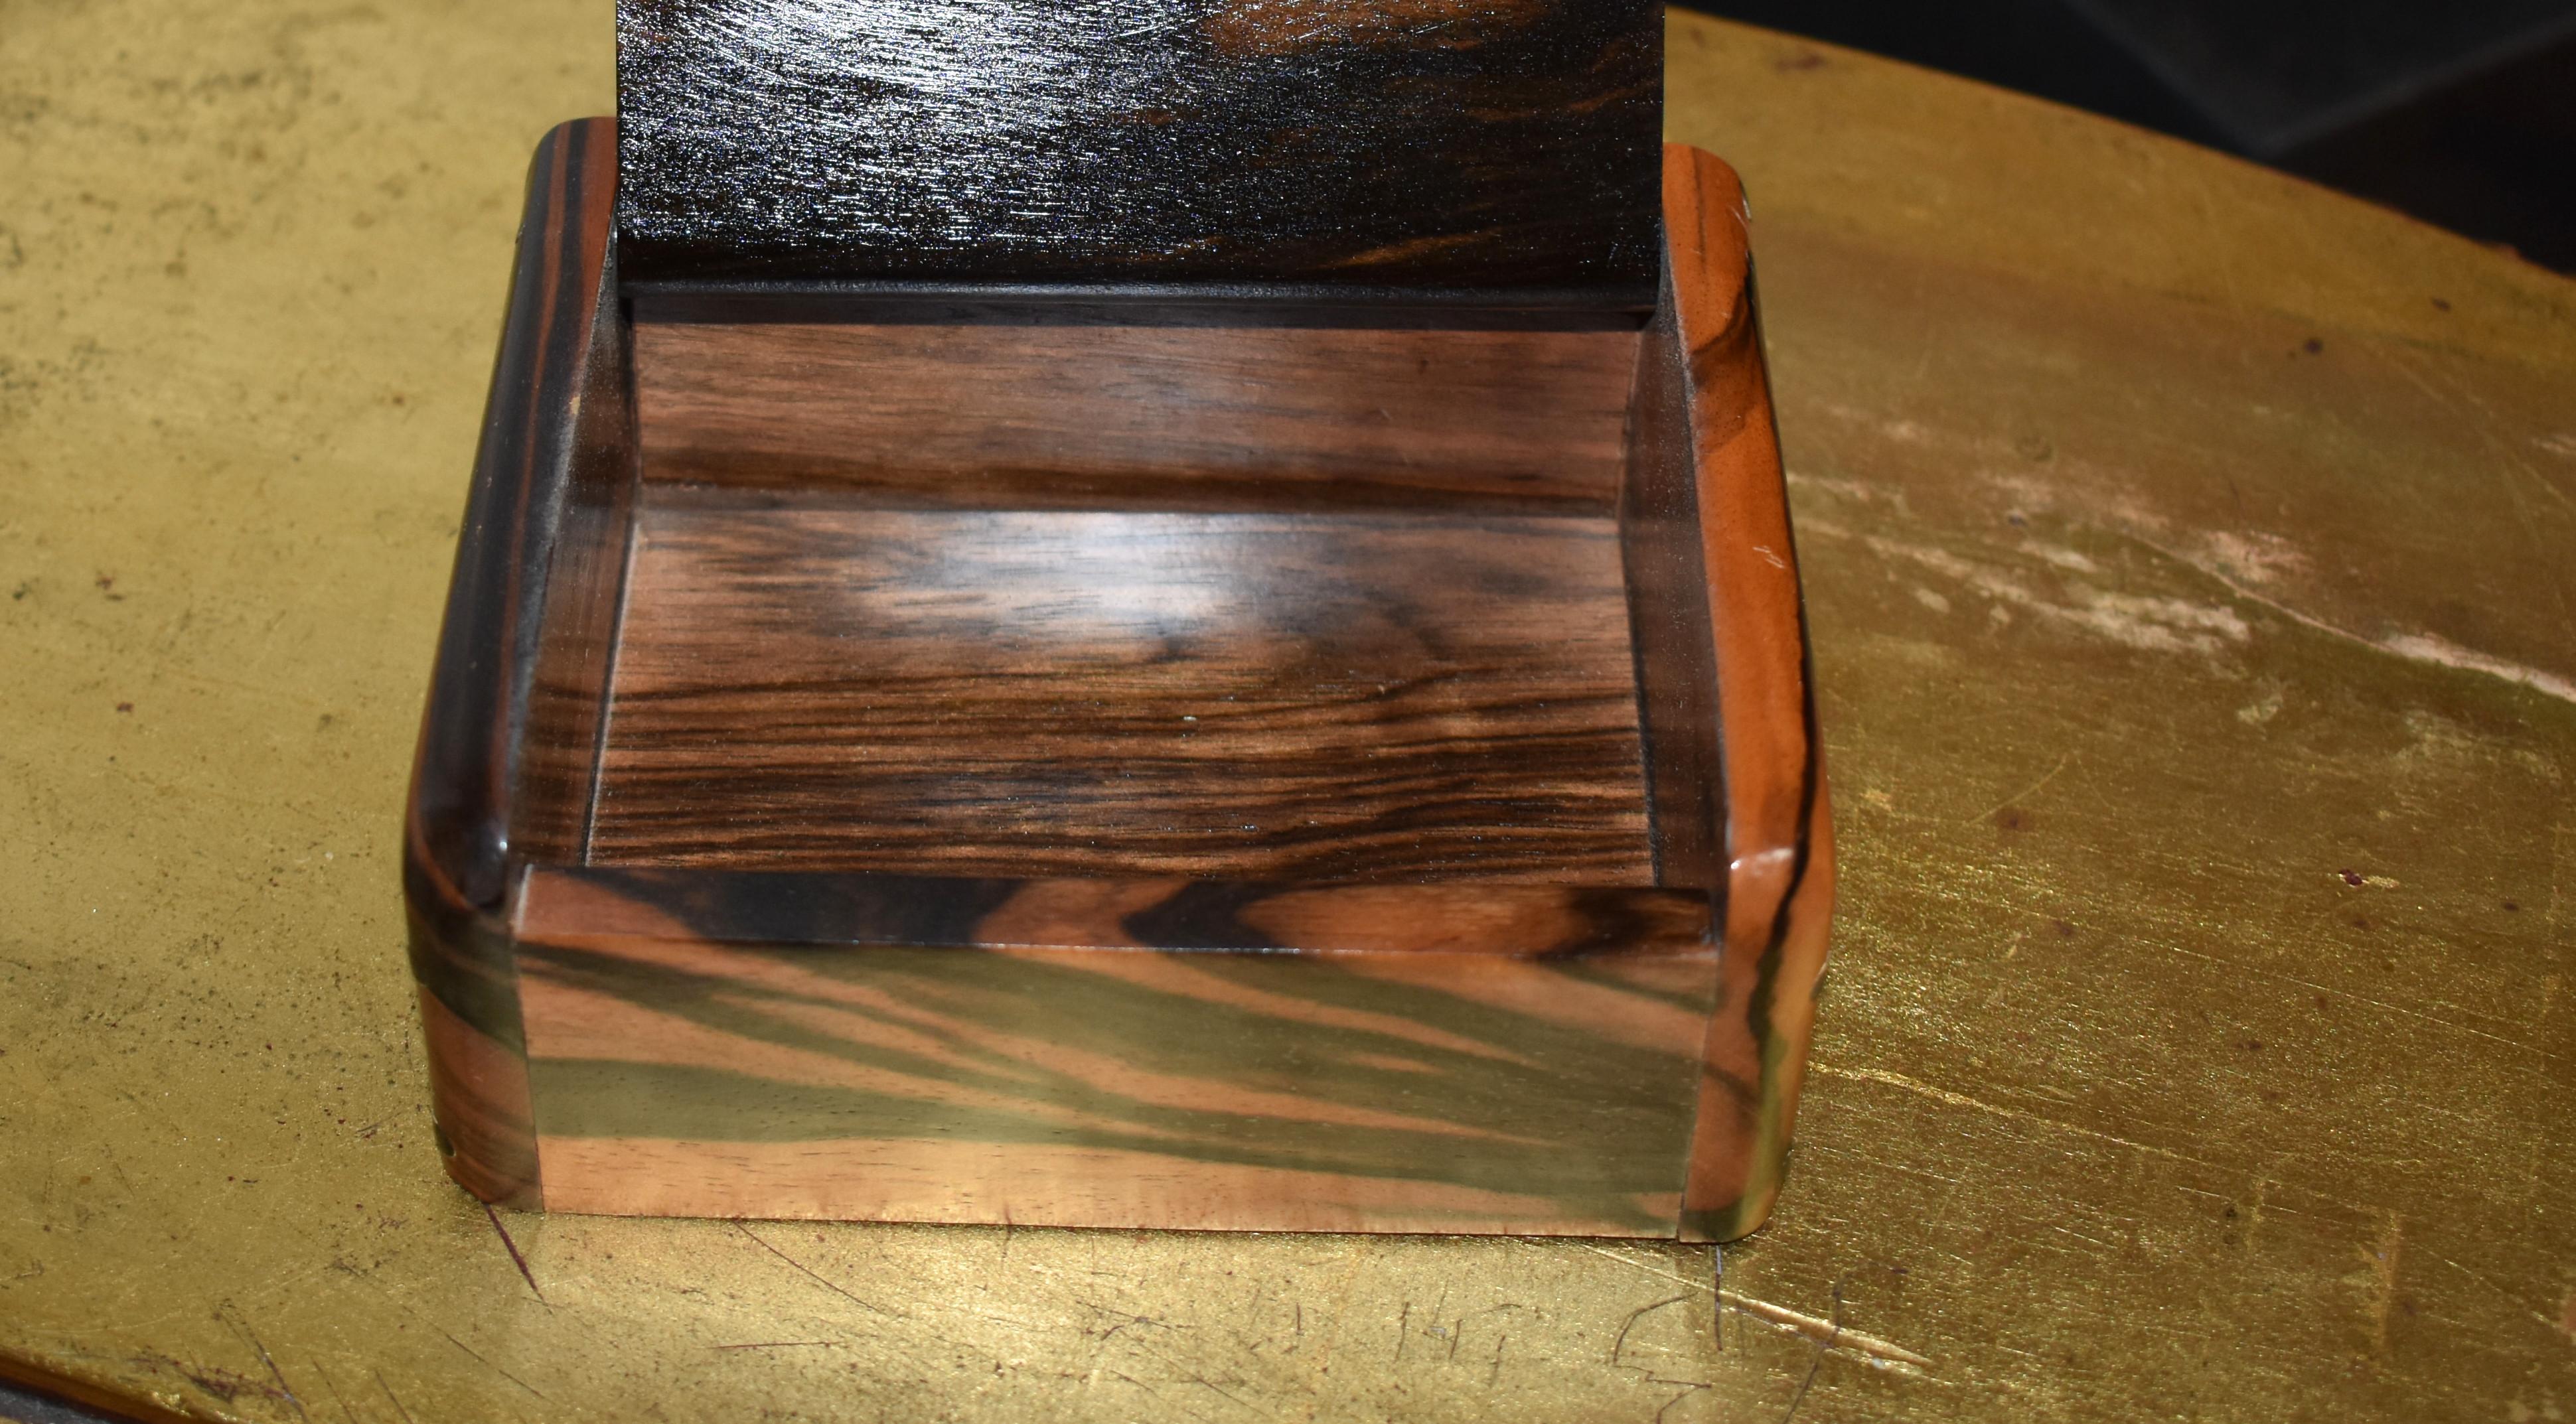 Zebra Wood Decorative Box In Good Condition For Sale In Cathedral City, CA